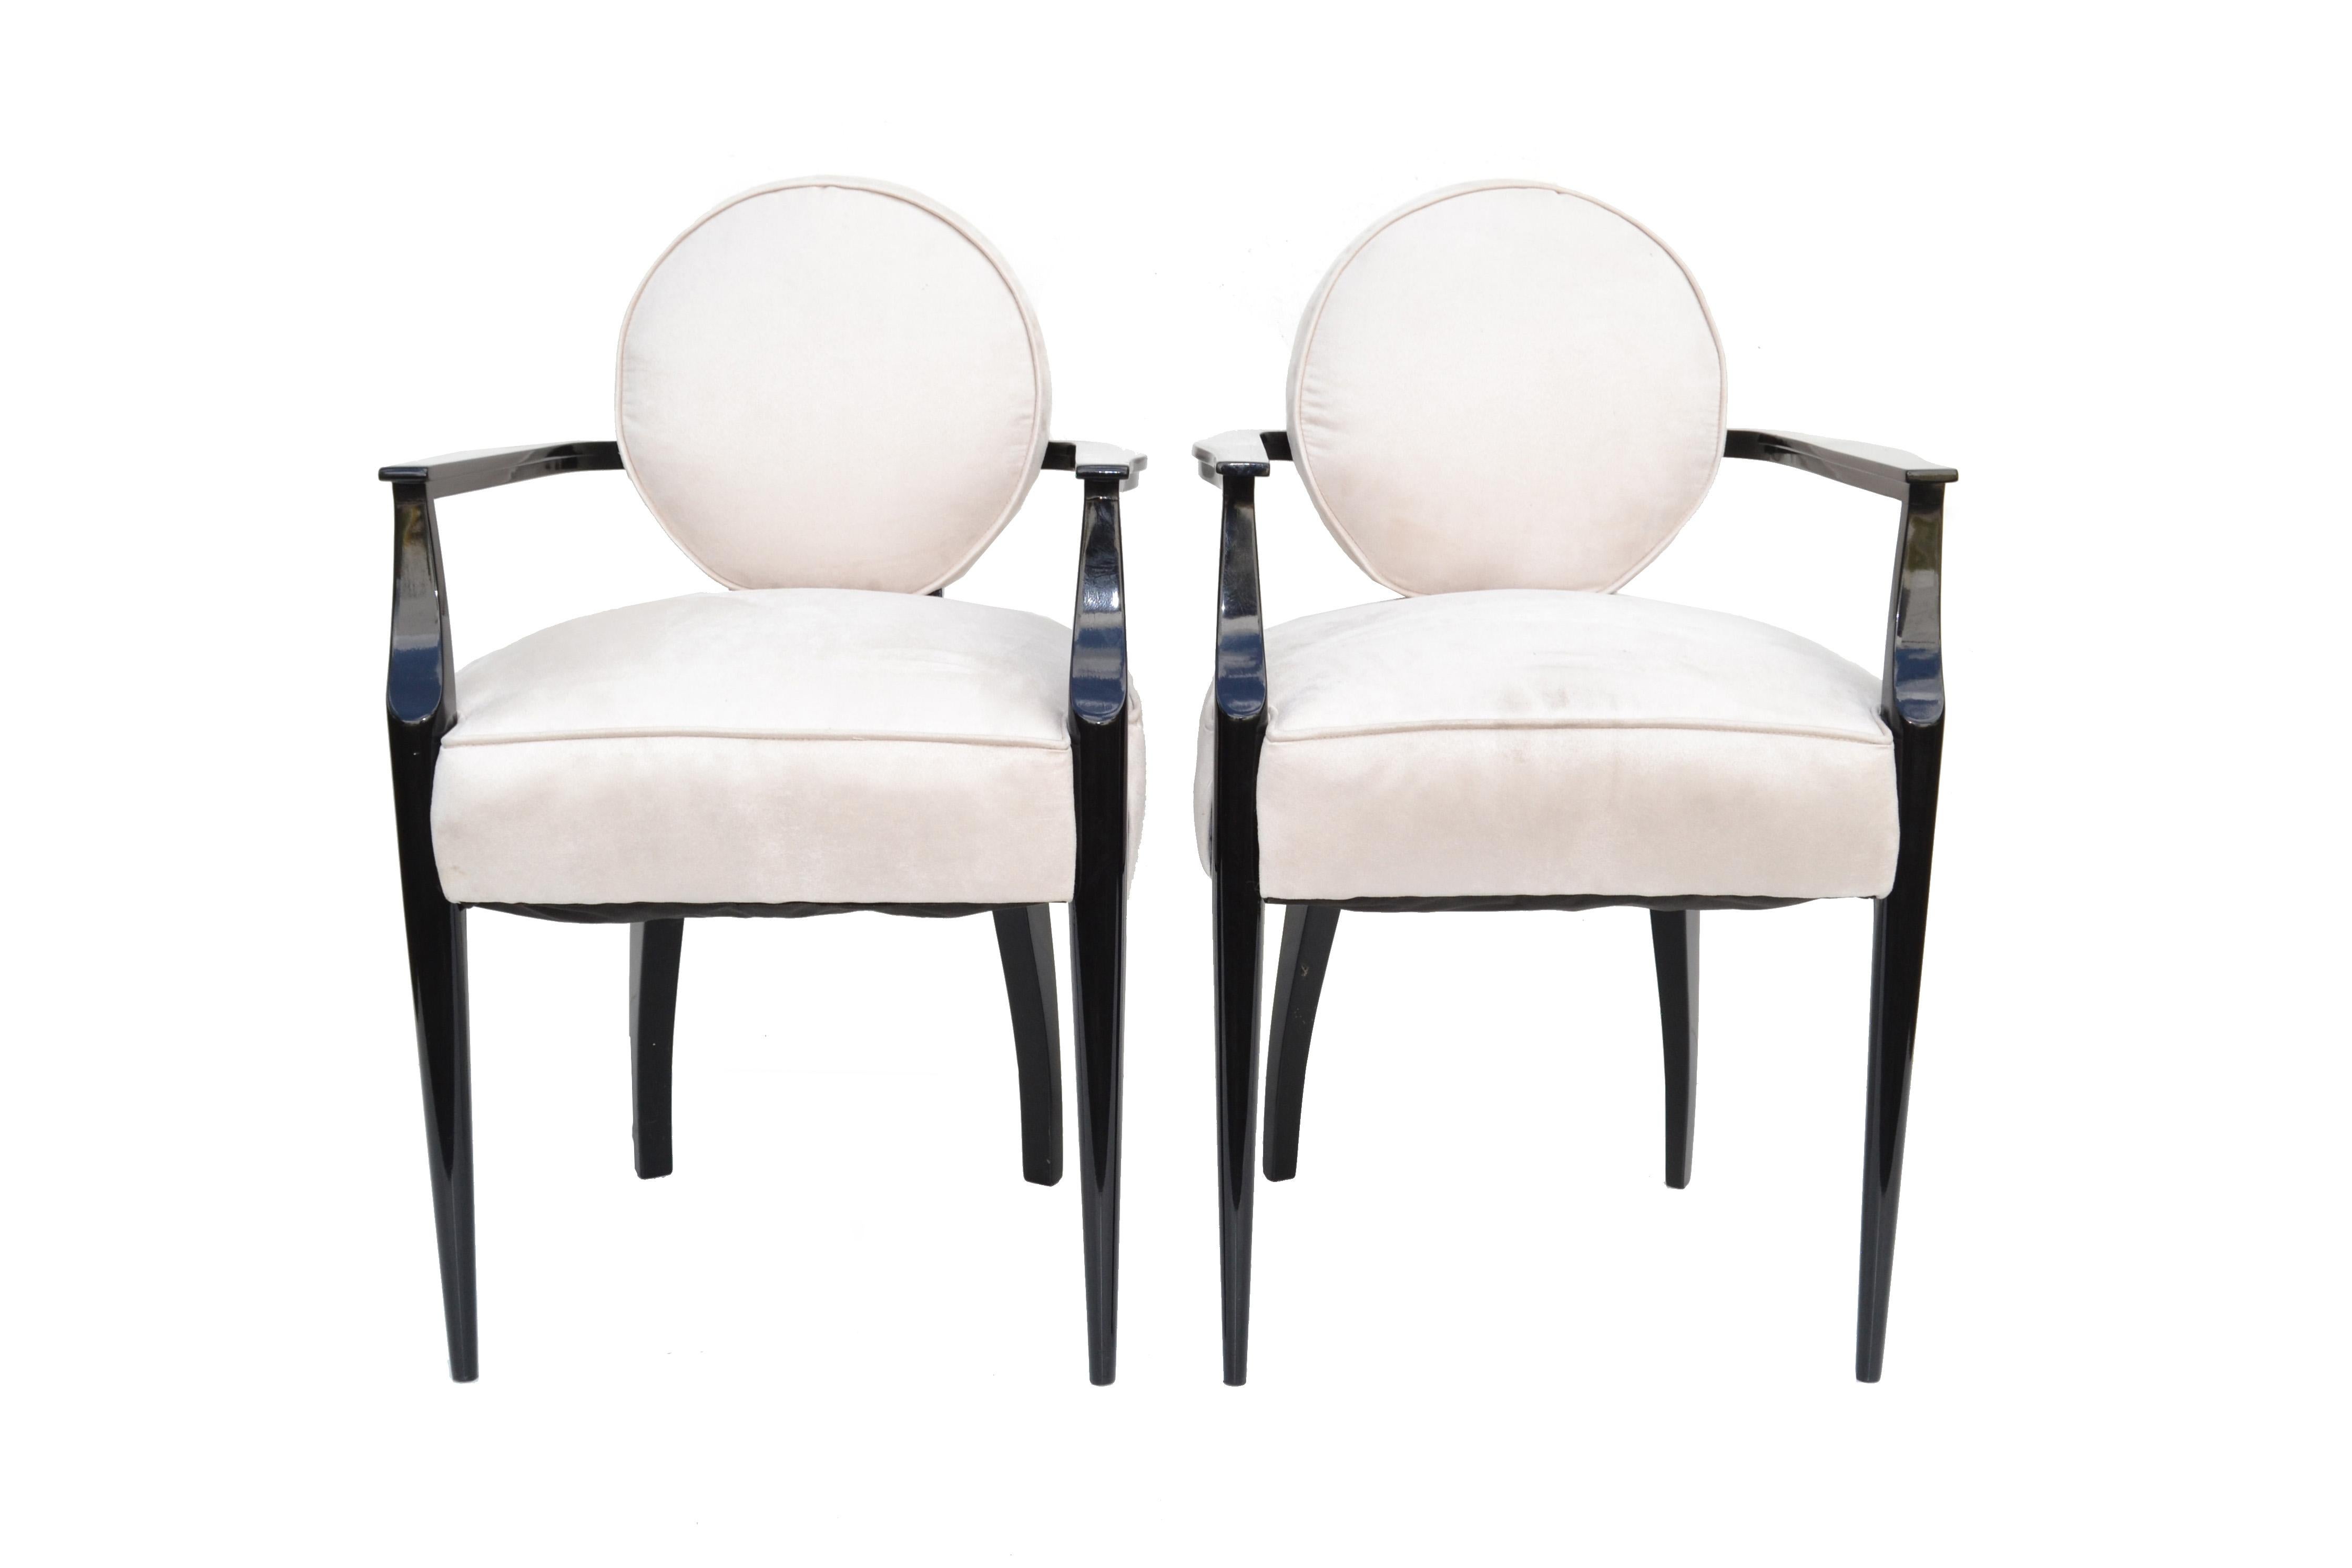 Lacquered French Art Deco Armchair Dominique style ultrasuede Fabric, Pair For Sale